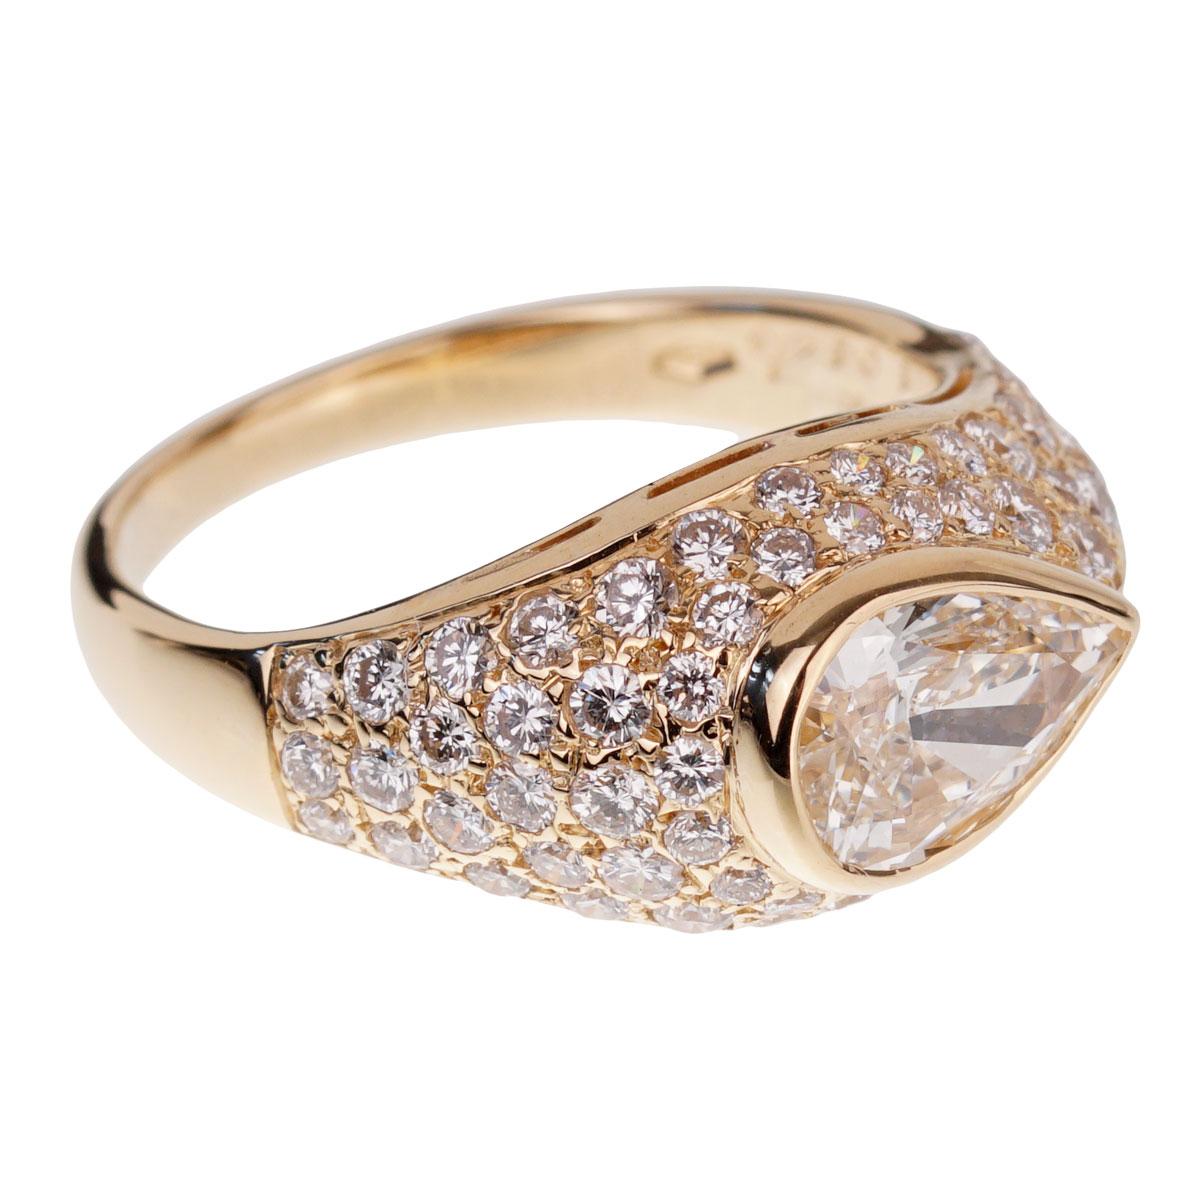 An iconic Bulgari diamond ring showcasing a 1.01ct pear shaped GIA certified diamond surrounded with a plethora of round brilliant cut diamonds in 18k yellow gold.

Size 5 1/2 resizable 